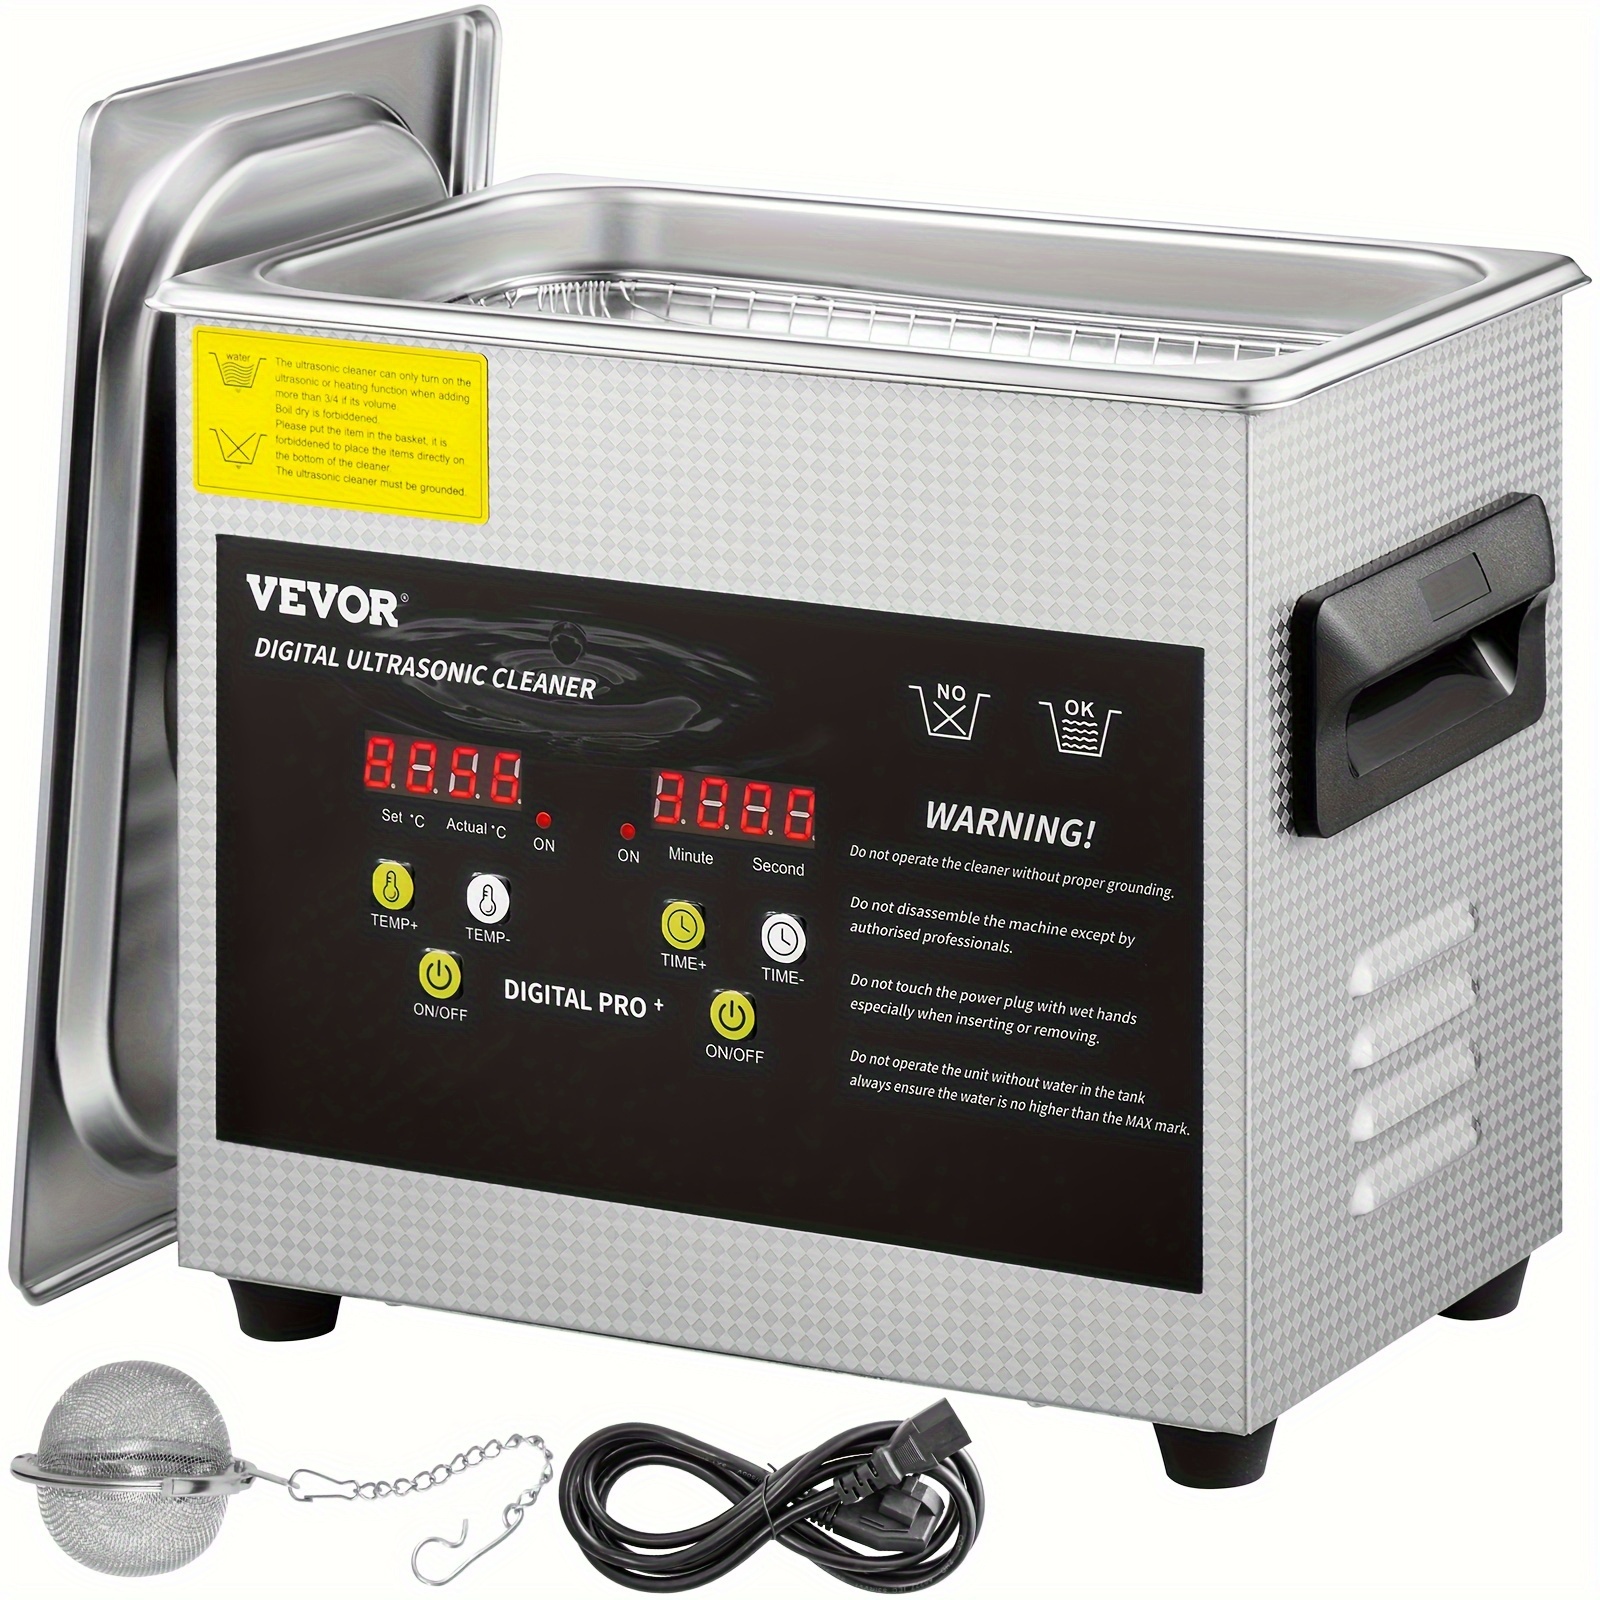 

Vevor 3l Upgraded Ultrasonic Cleaner (200w Heater, 120w Ultrasonic) Professional Digital Lab Ultrasonic Parts Cleaner With Heater Timer For Jewelry Glasses Parts Cleaning